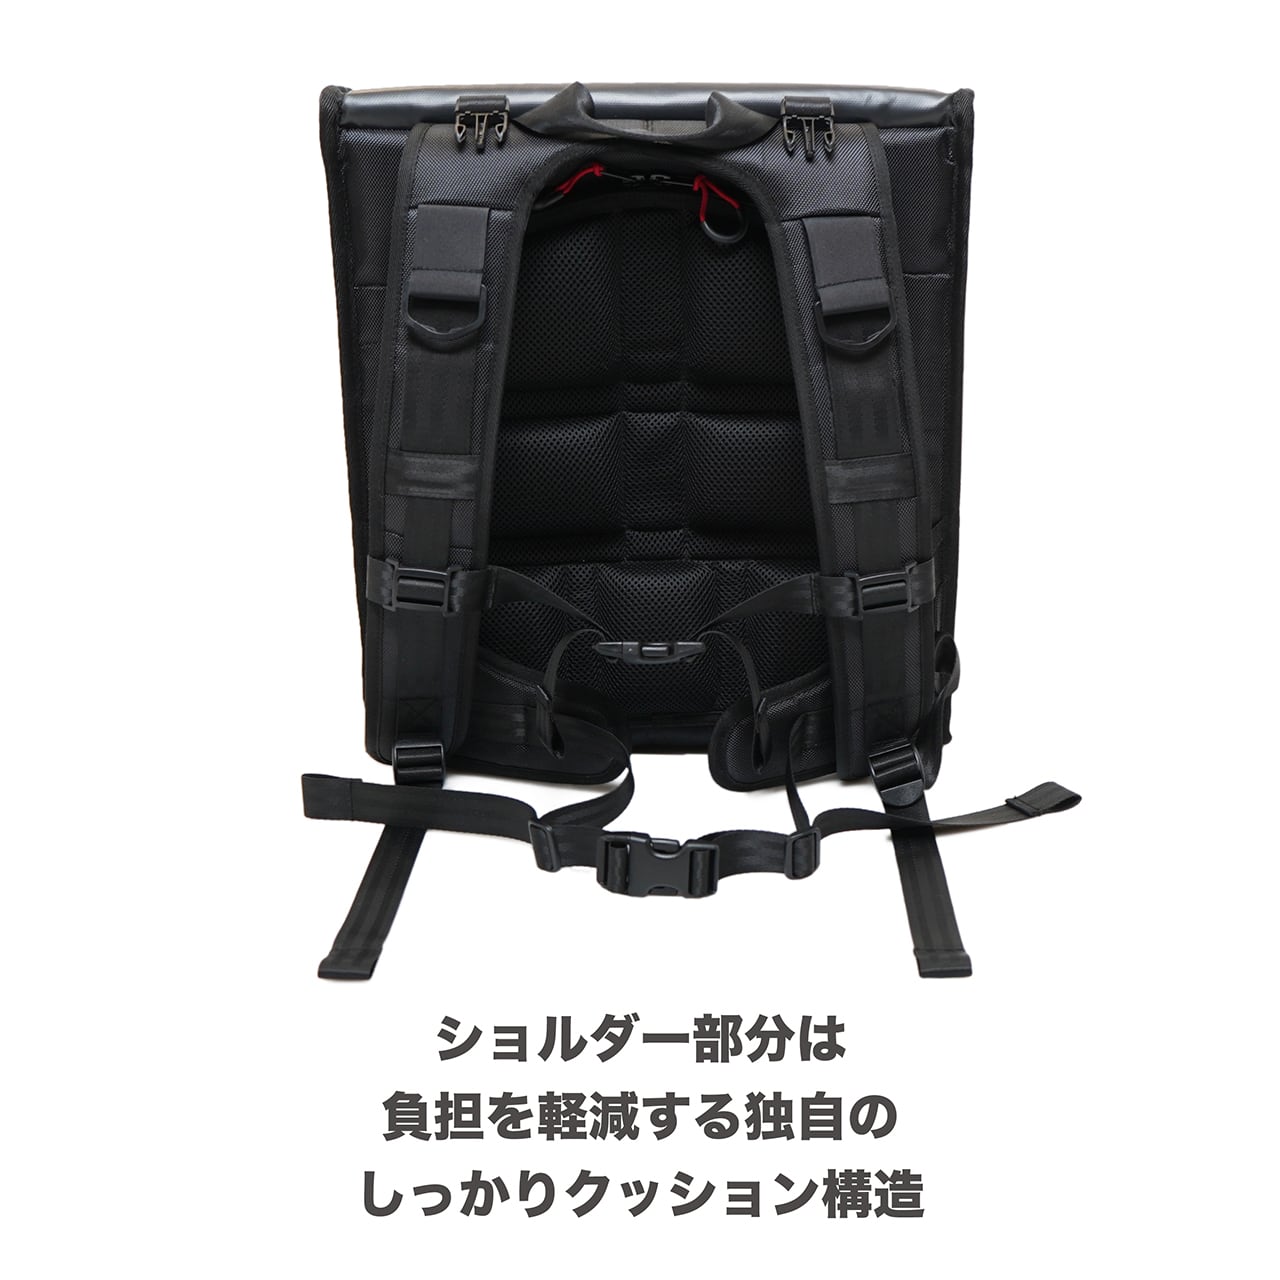 SCOUT CARRY BACKPACK